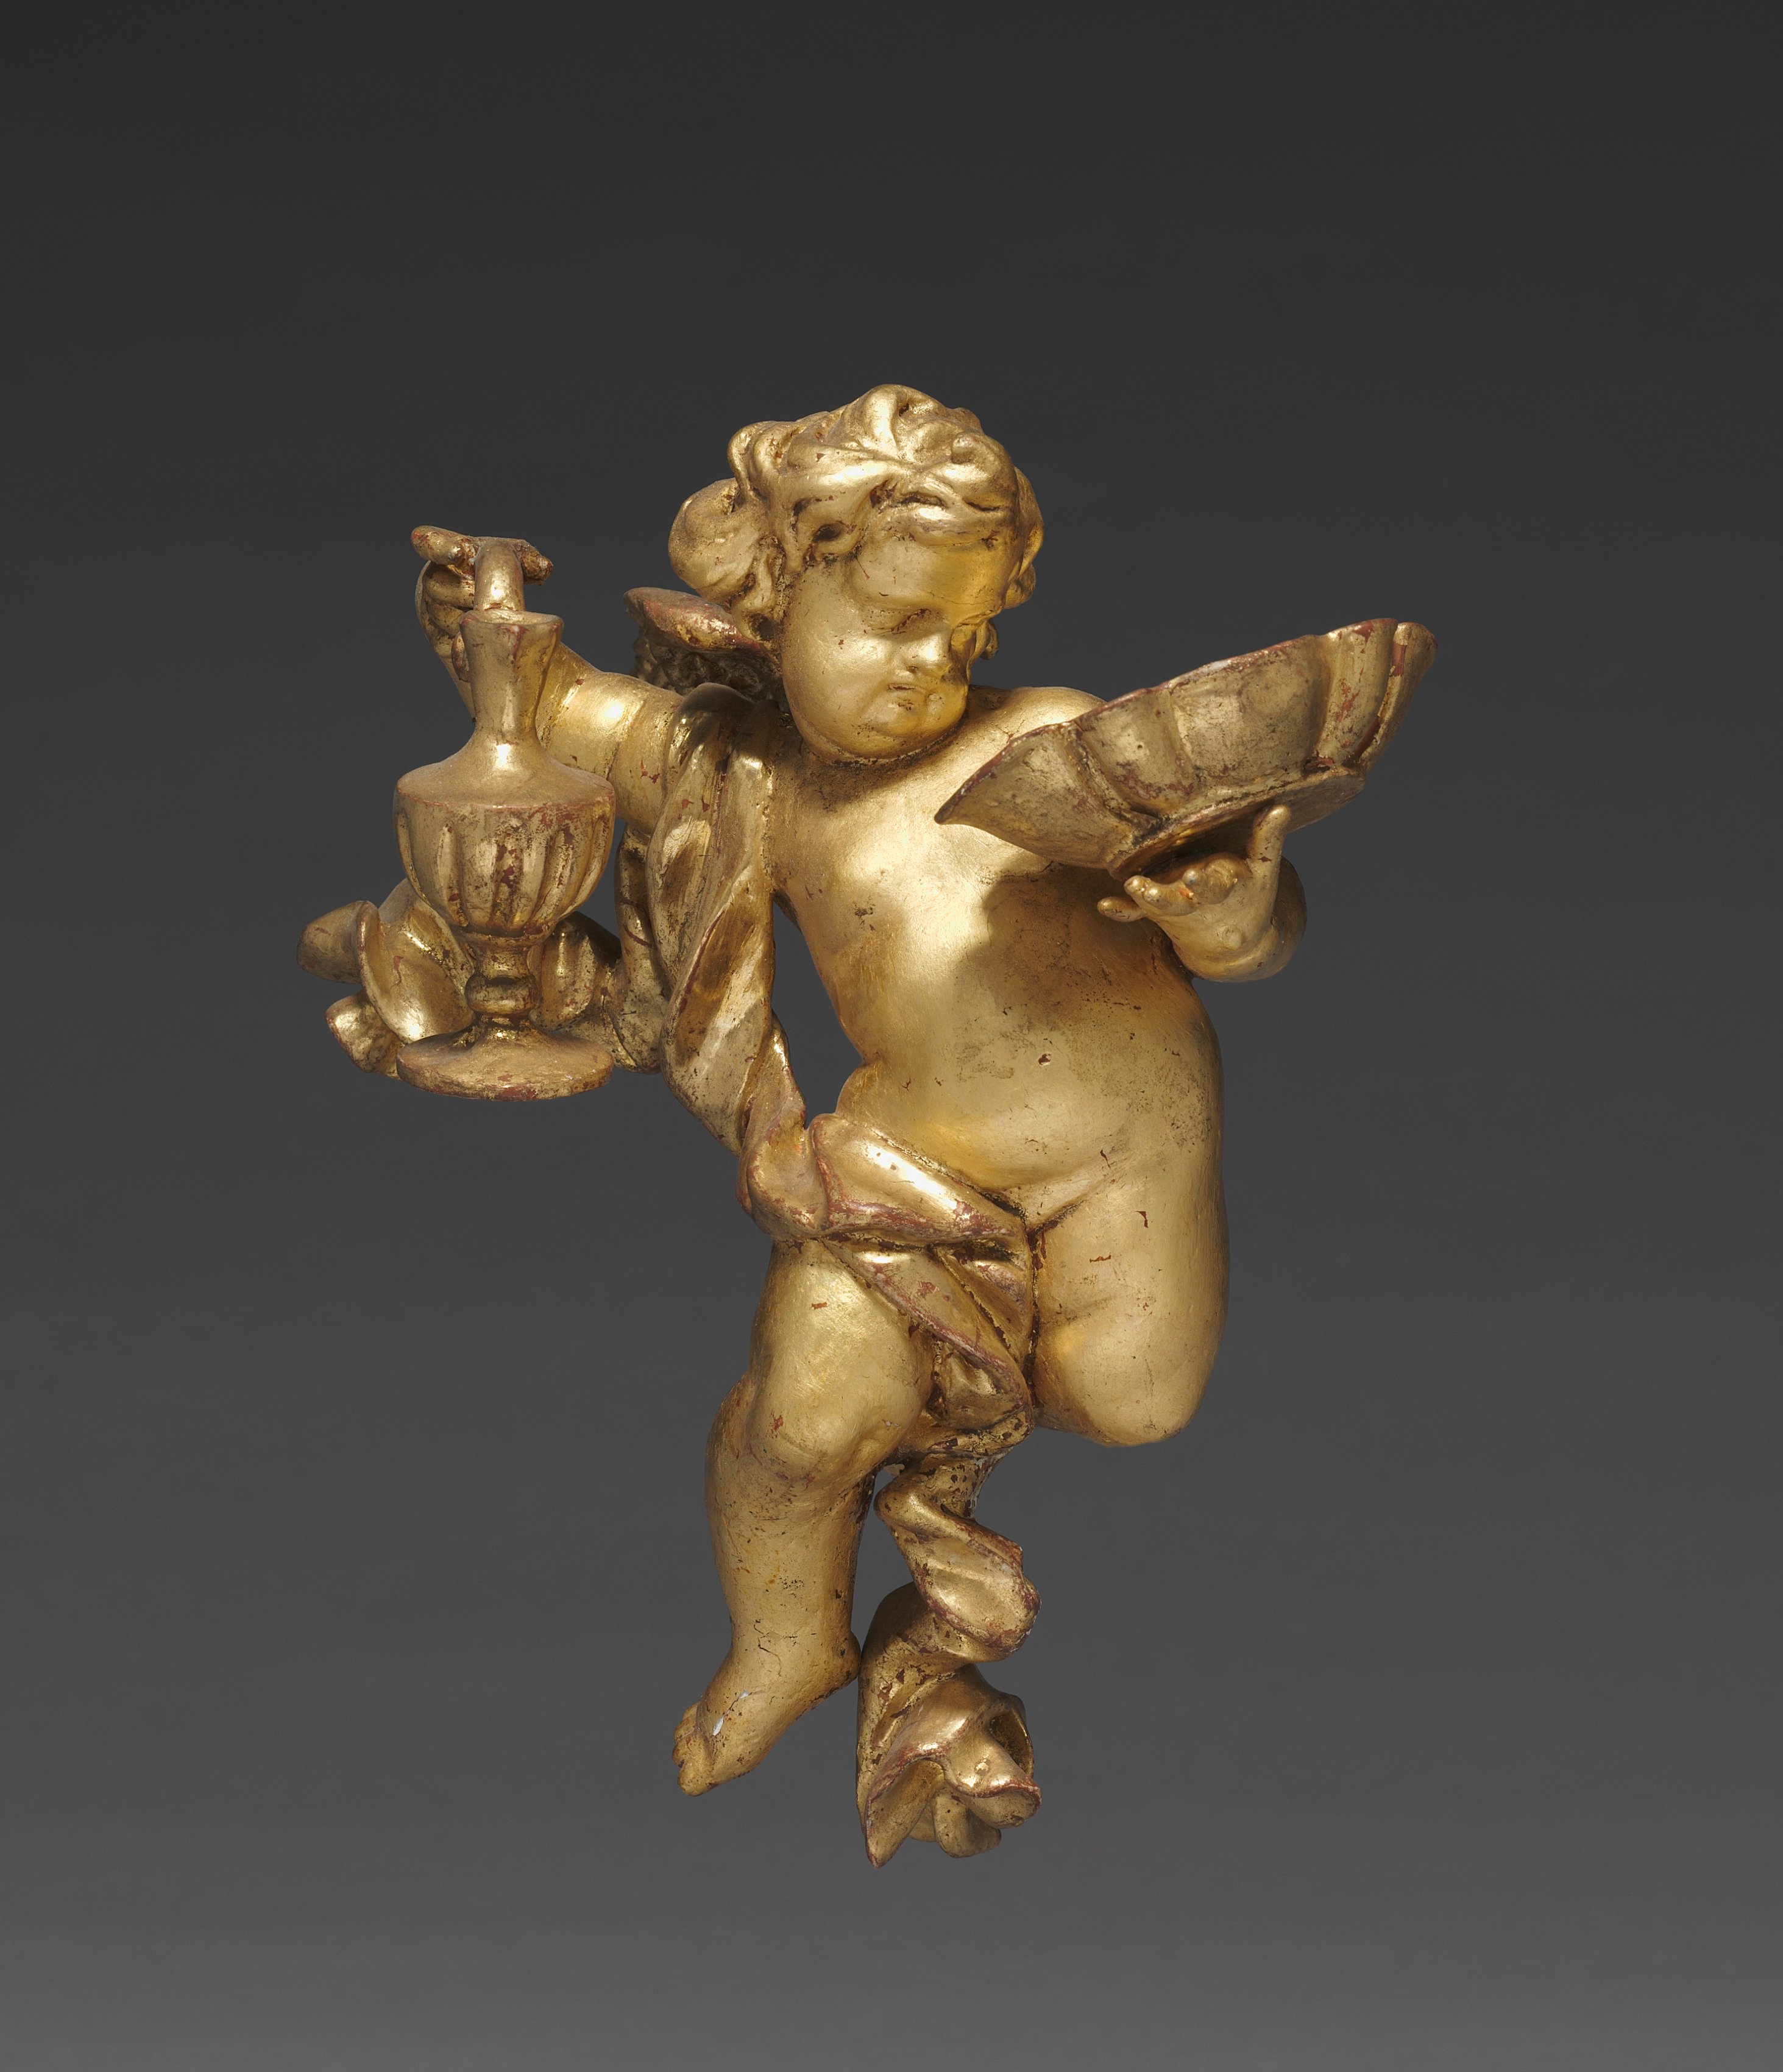 Altarpiece with Relics - Putto with Ewer, upper left